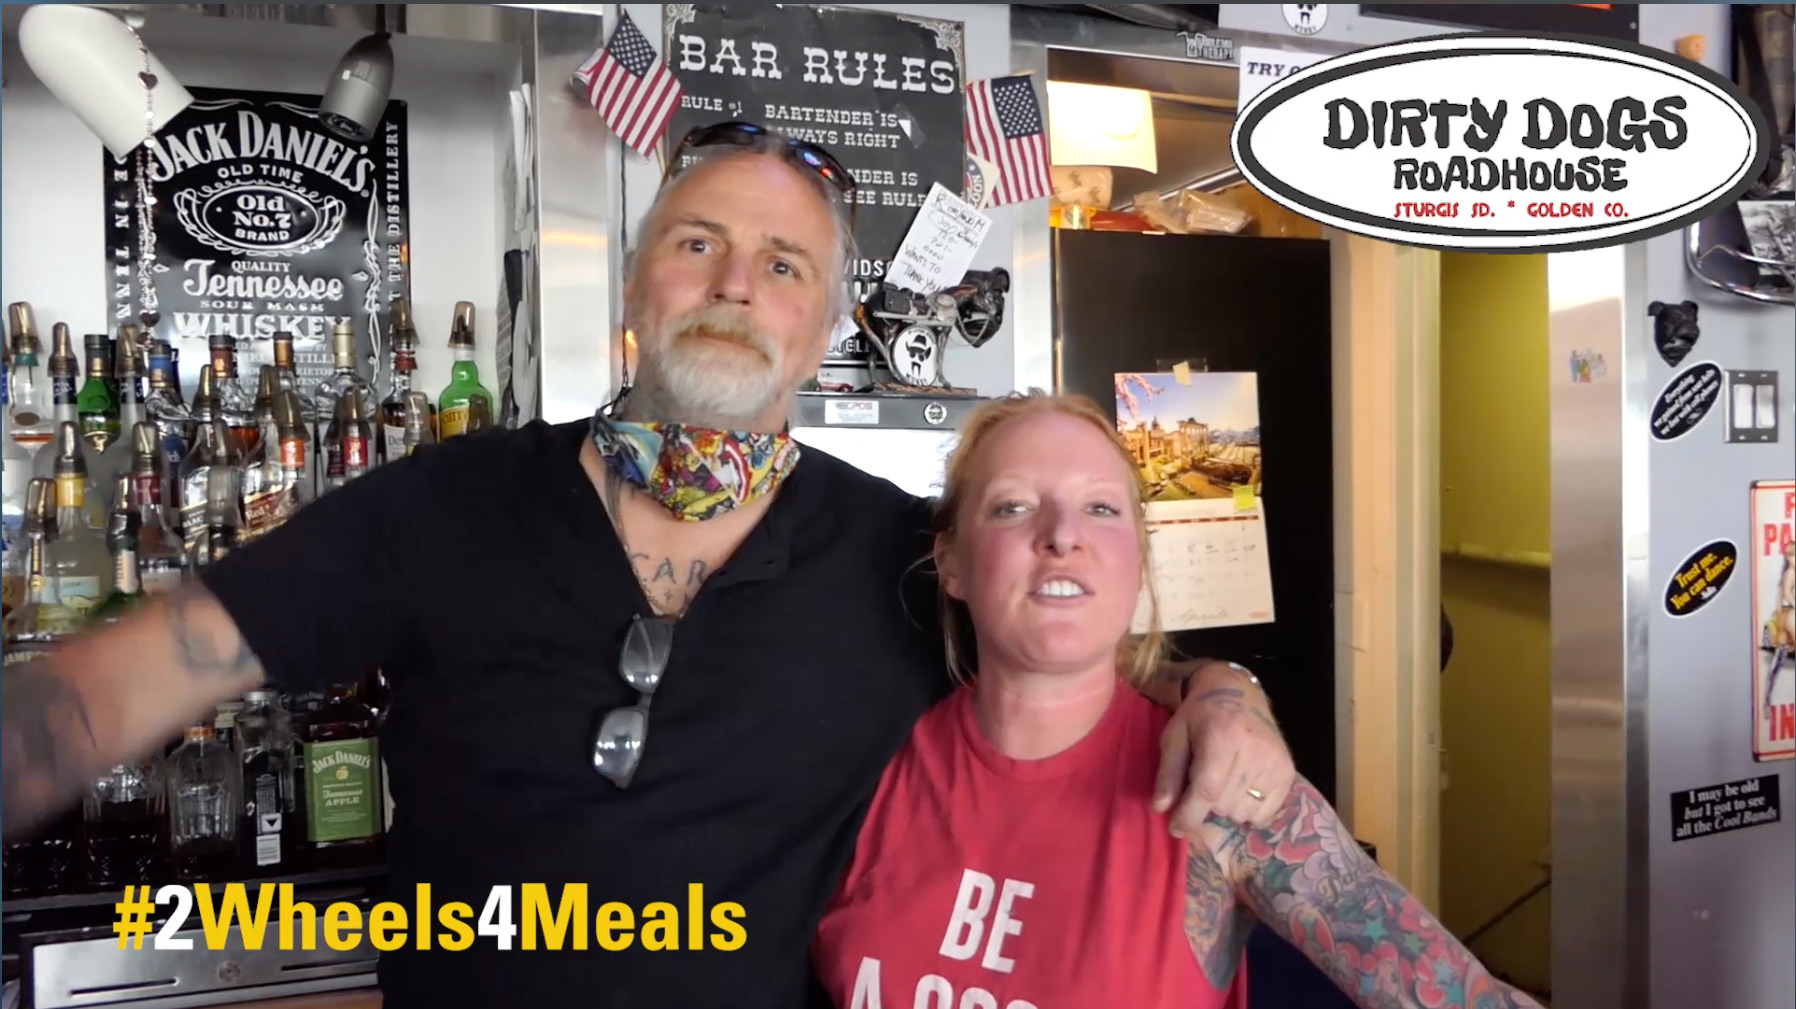 #2Wheels4Meals – Feeding Joshua Station, Dirty Dogs Donation Update